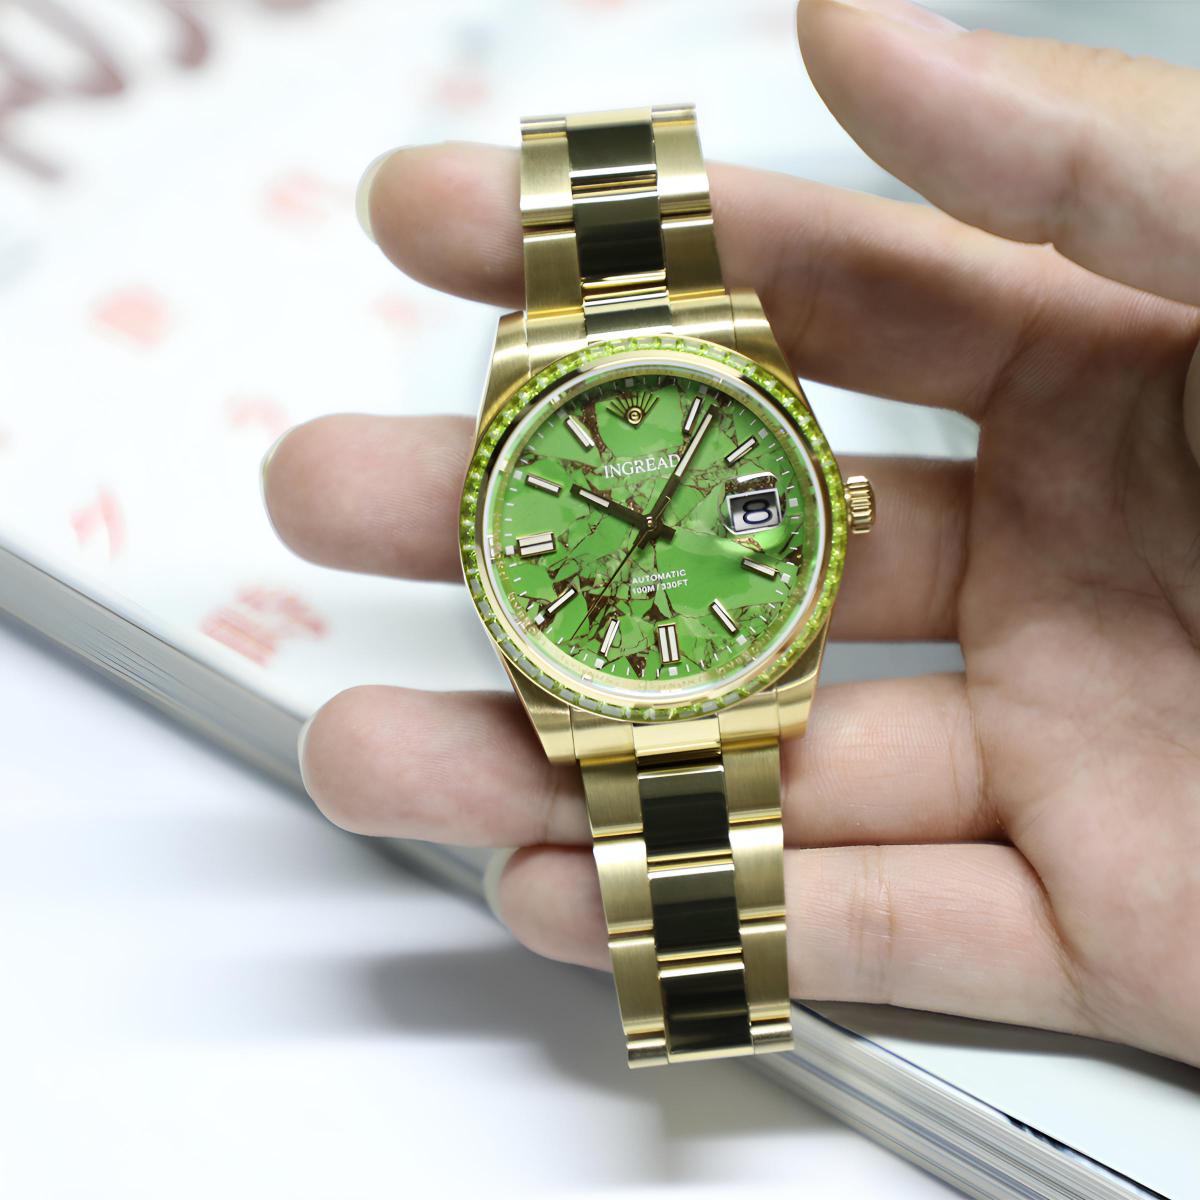 Light Green Turquoise Dial with Zircon Gems, Sapphire Crystal, 40mm, Stainless Steel, IN-23006-44